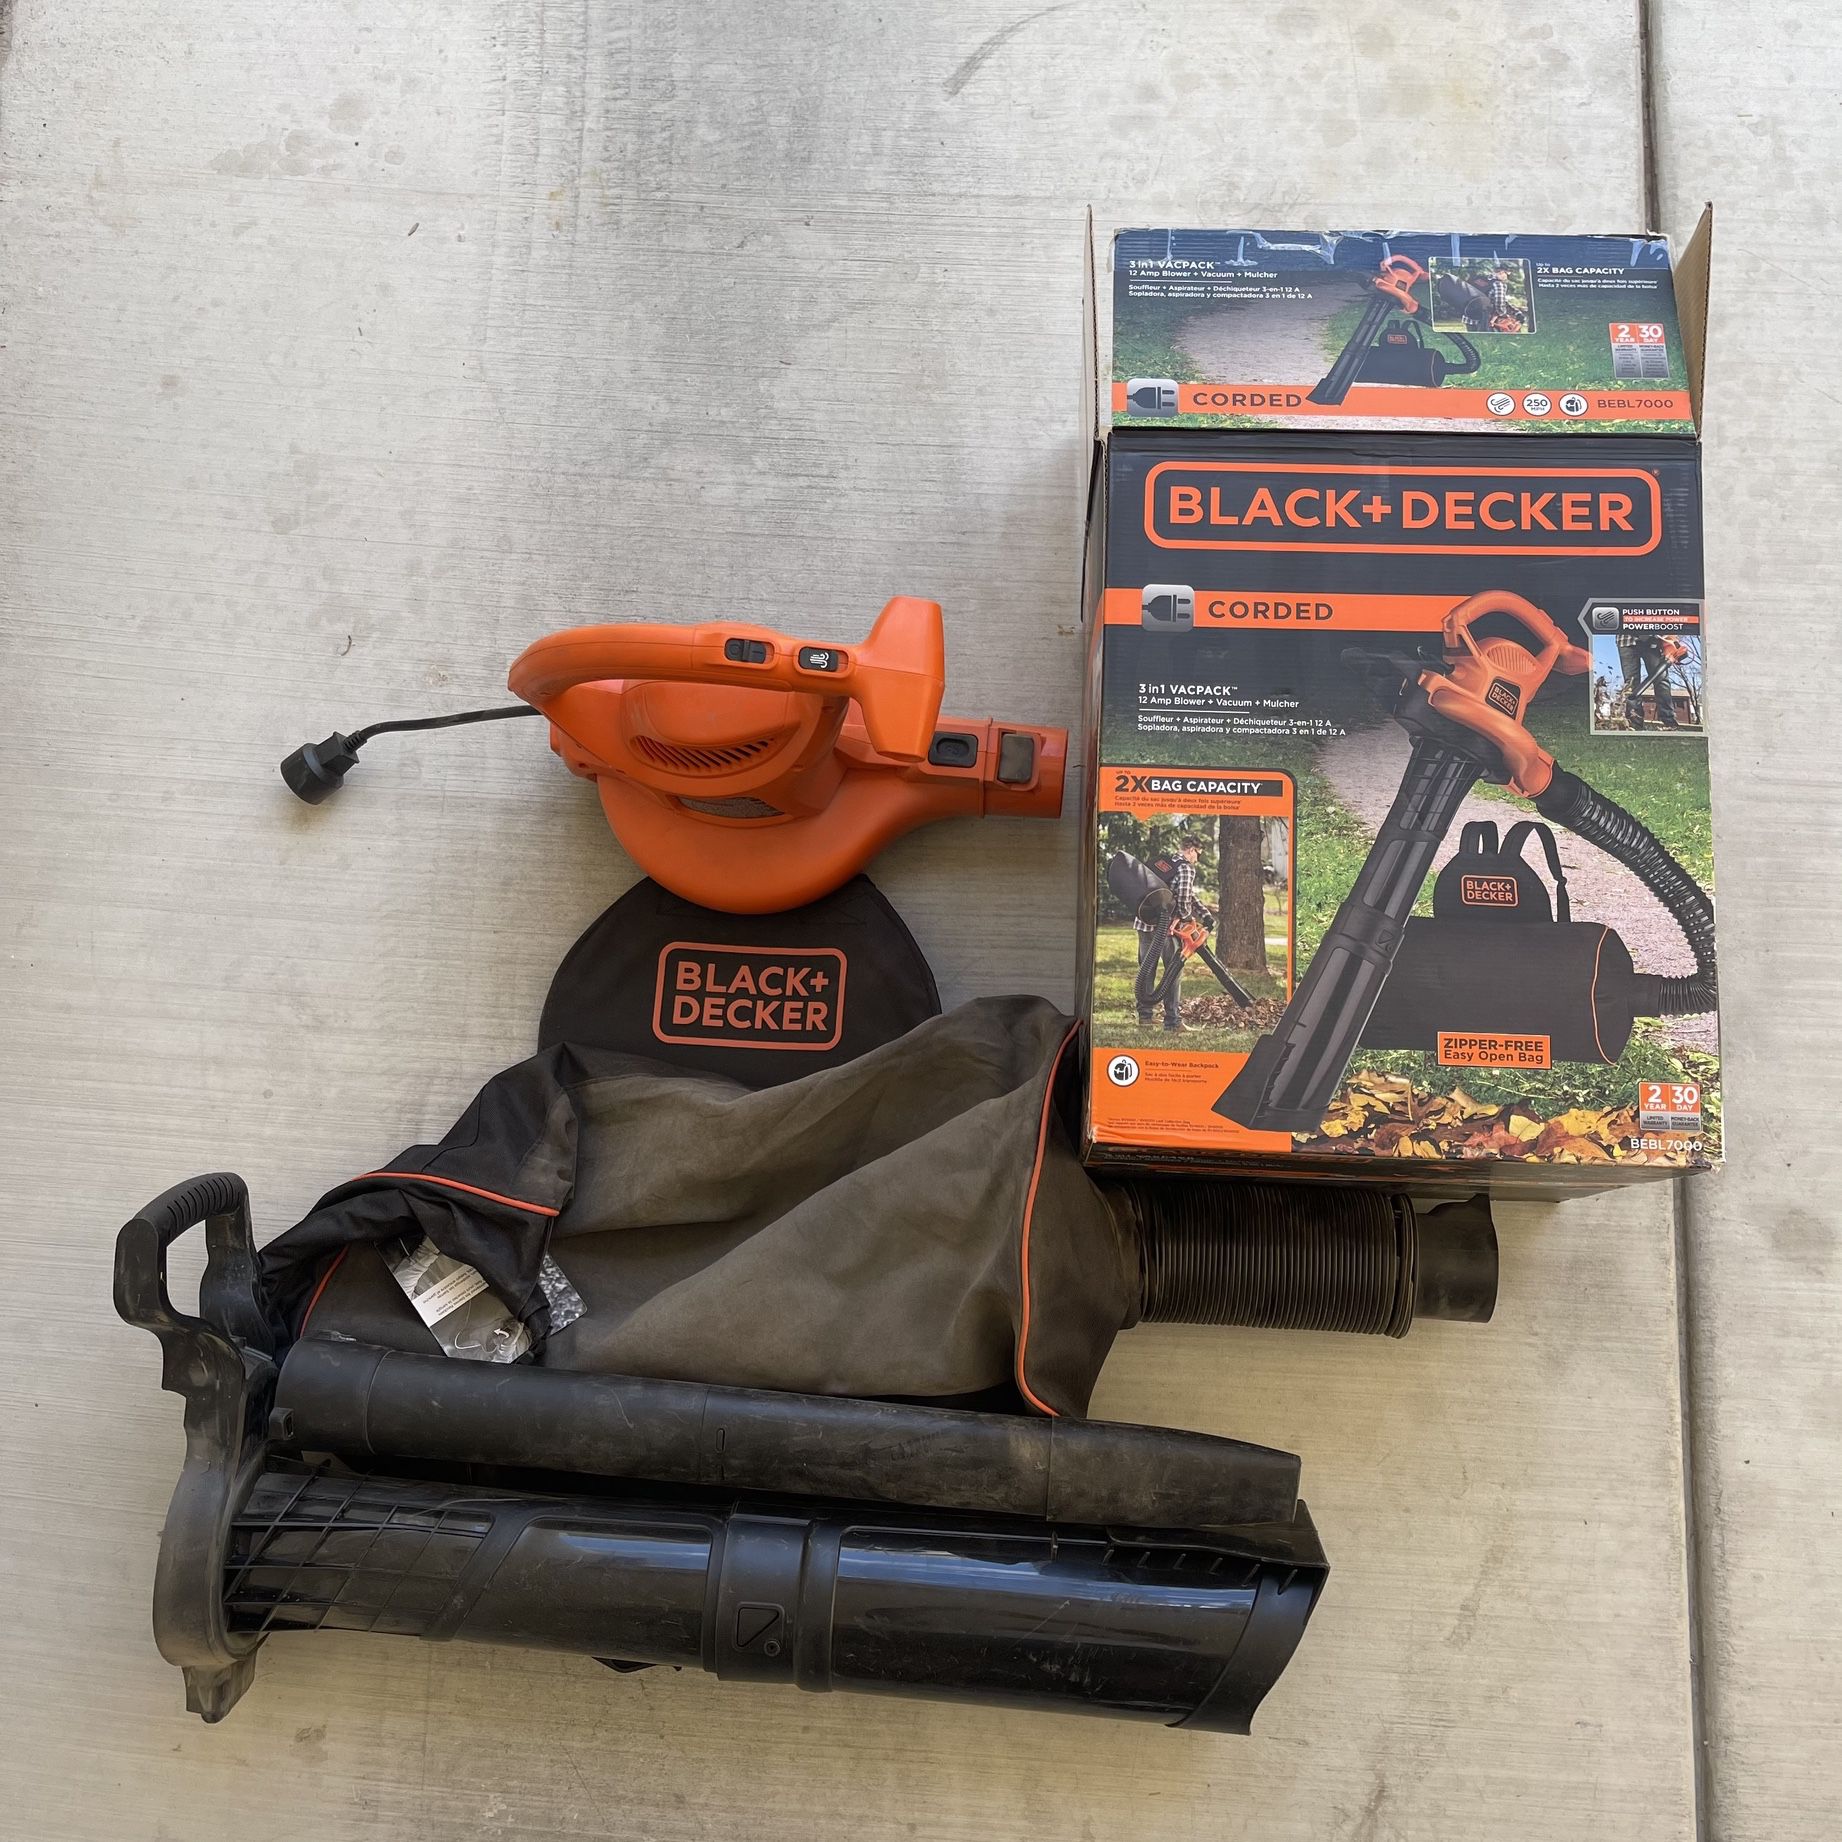  BLACK+DECKER Electric Leaf Blower, Leaf Vacuum and Mulcher 3 in  1, 250 mph Airflow, 400 cfm Delivery Power, Reusable Bag Included, Corded  (BEBL7000) : Patio, Lawn & Garden